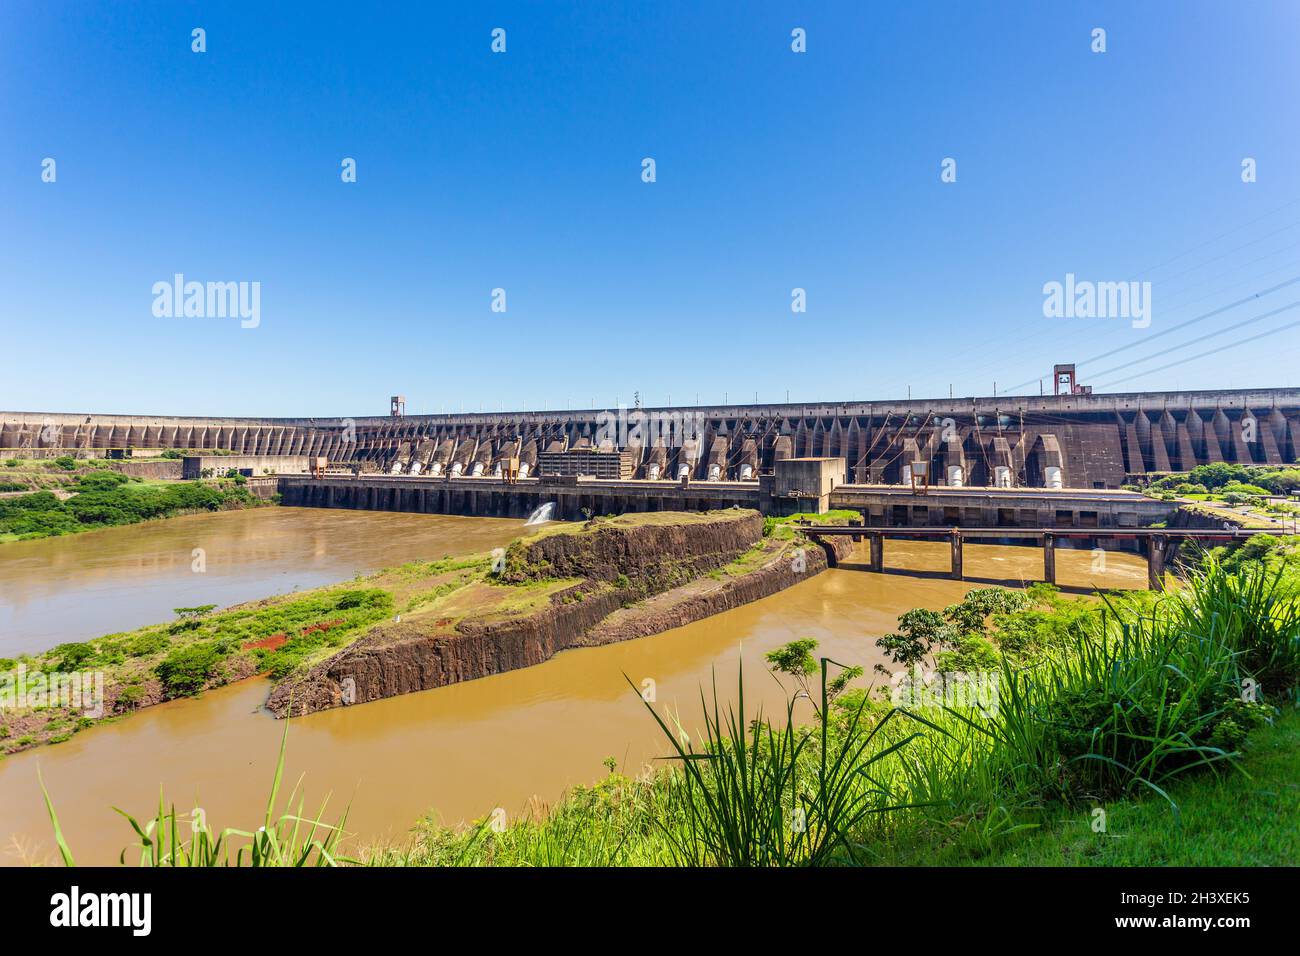 Massive Itaipu hydroelectric dam on the Parana River located on the border between Brazil and Paraguay Stock Photo